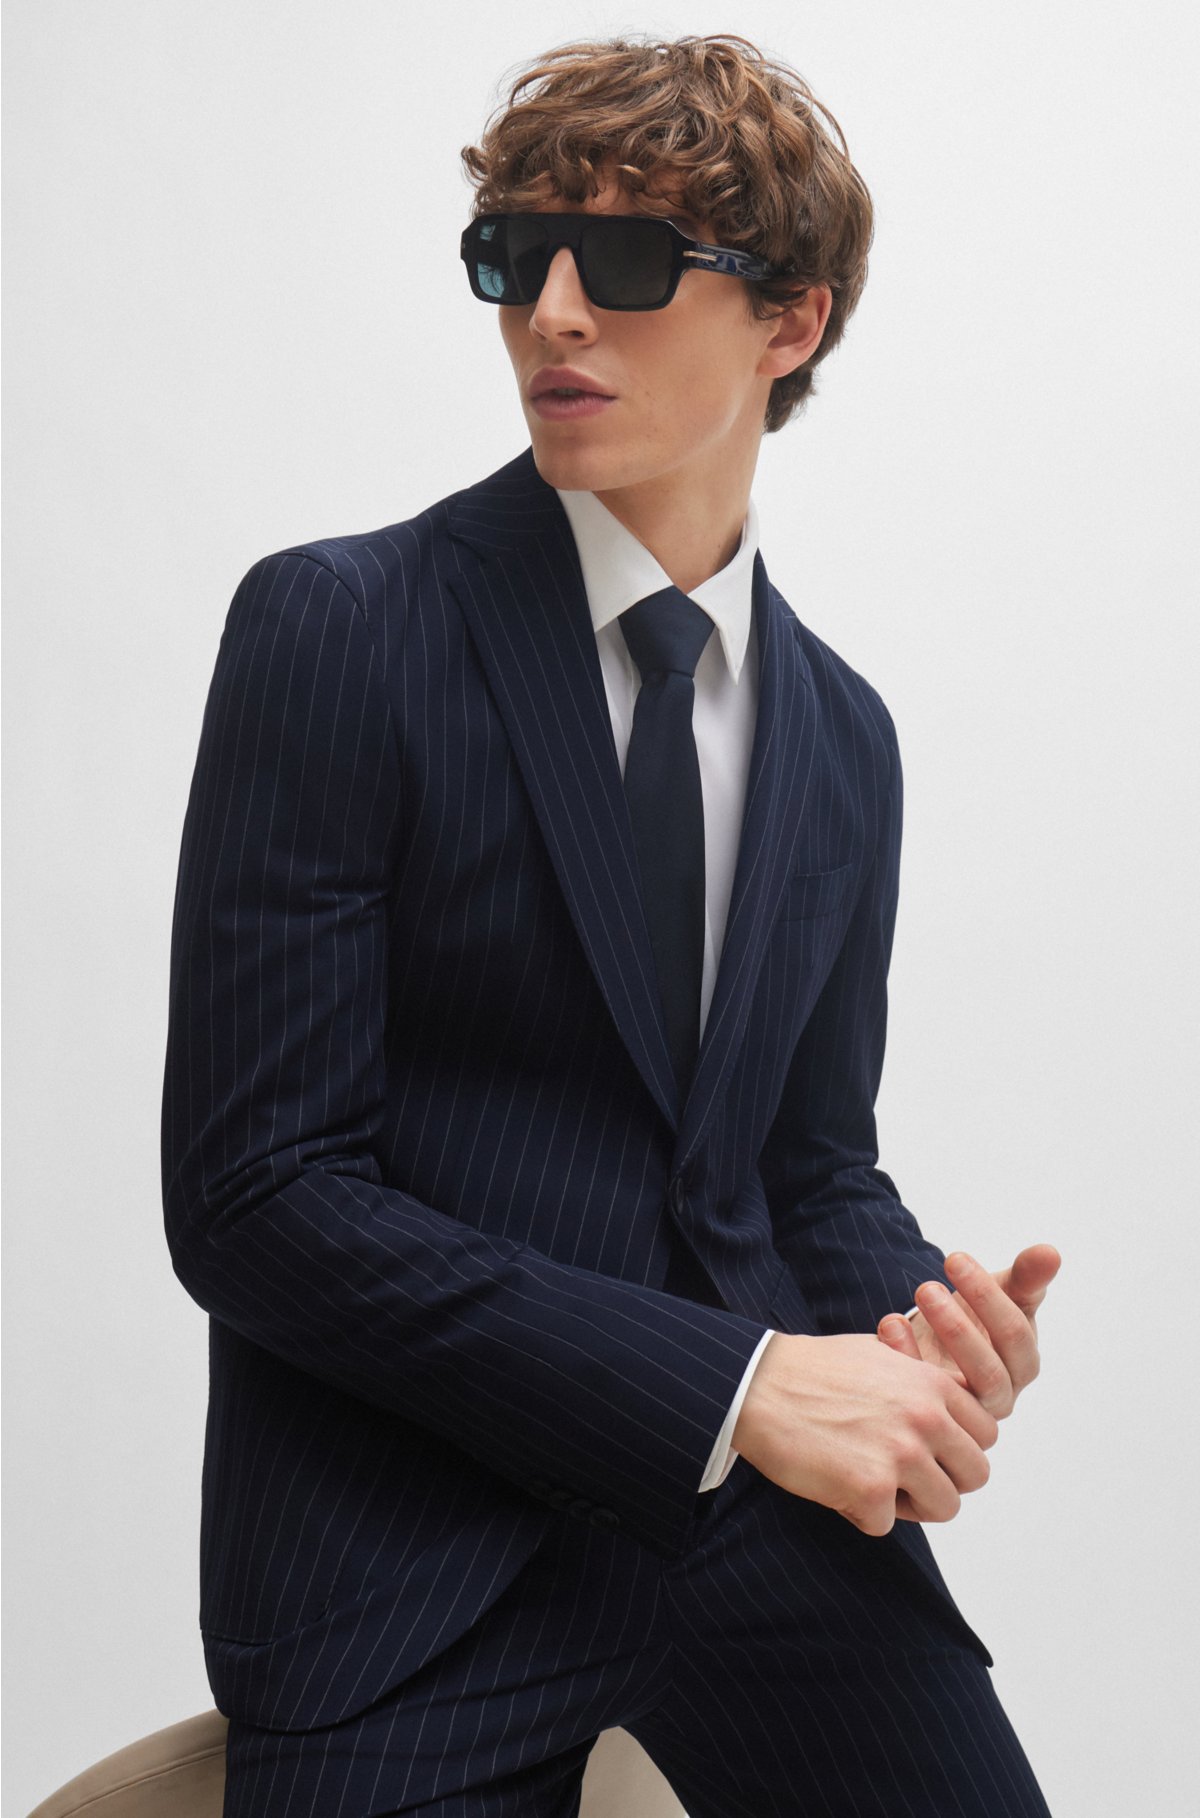 BOSS - Slim-fit suit in pinstripe performance-stretch fabric